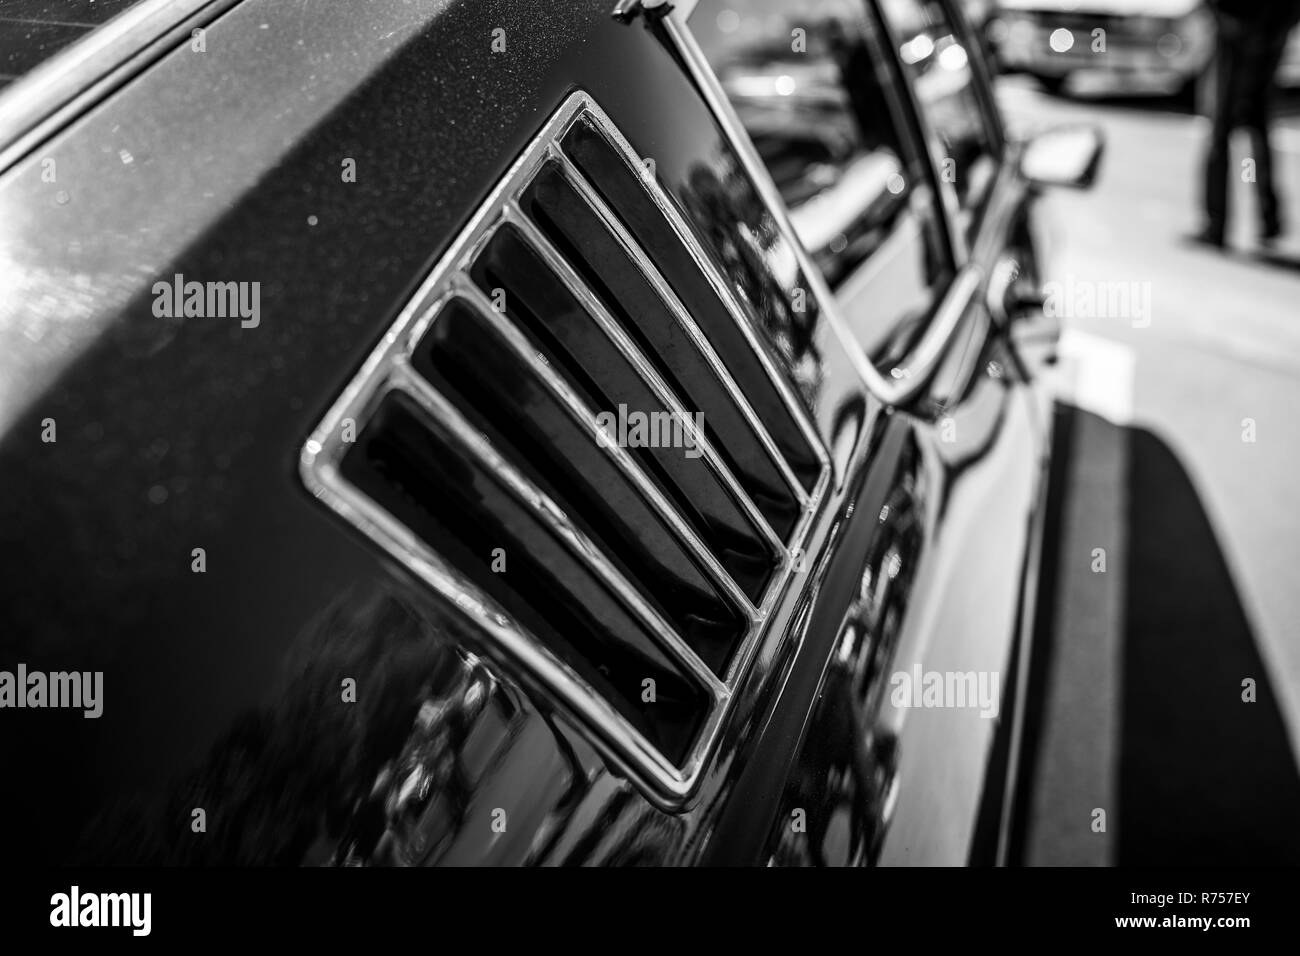 Ventilation grille in the body of a sports car. Black and white